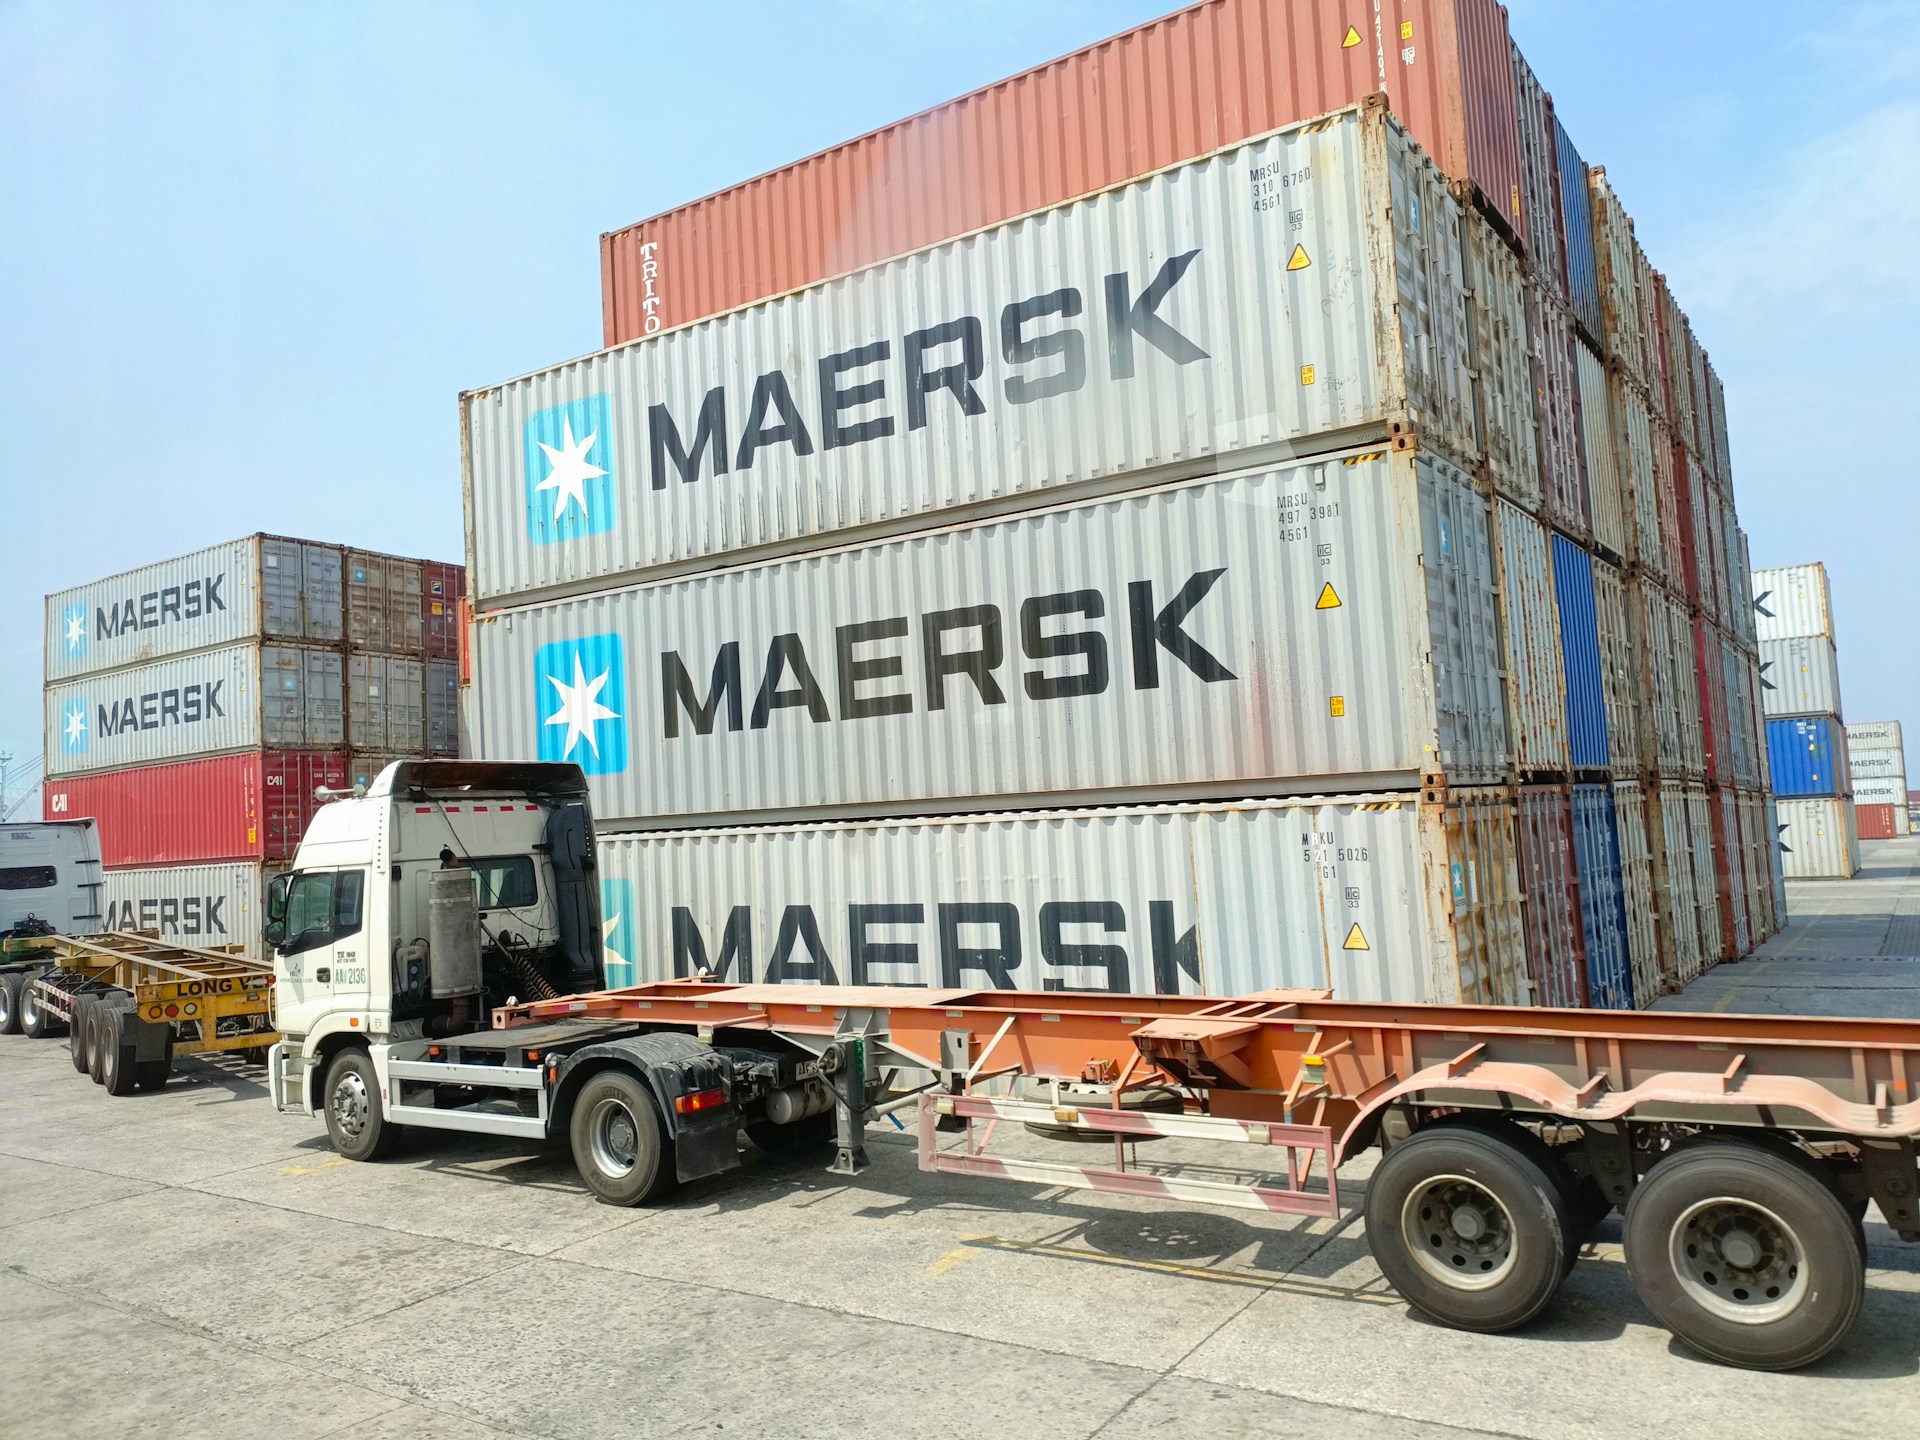 Maersk shipping containers and truck in port